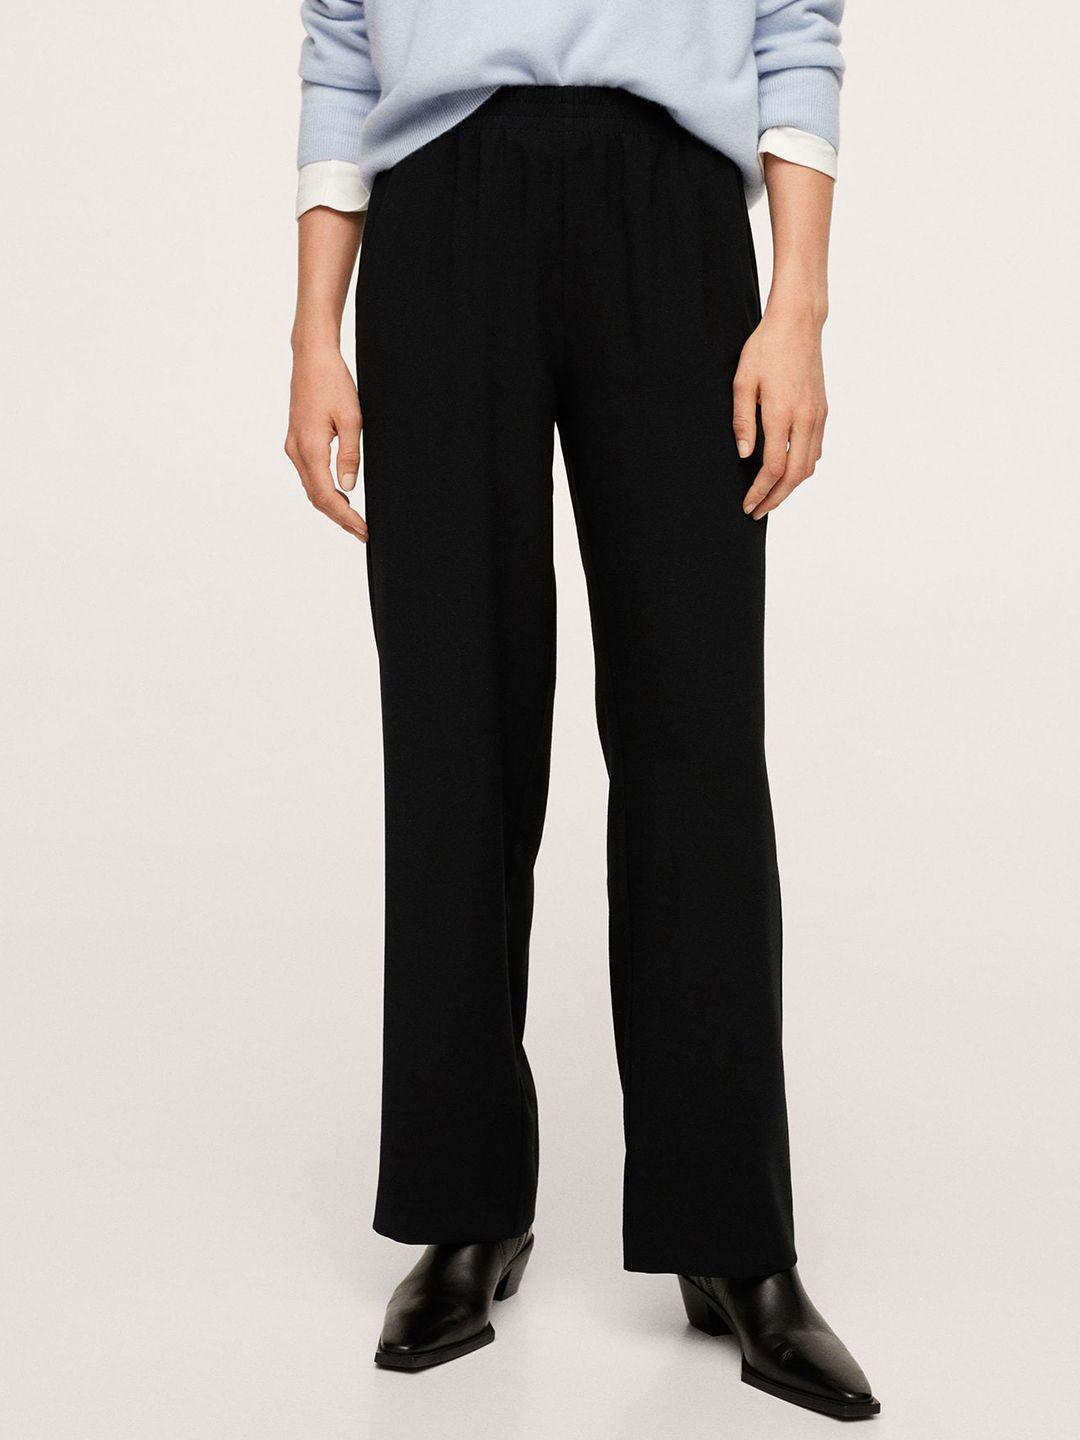 MANGO Women Black Solid Straight Fit Trousers